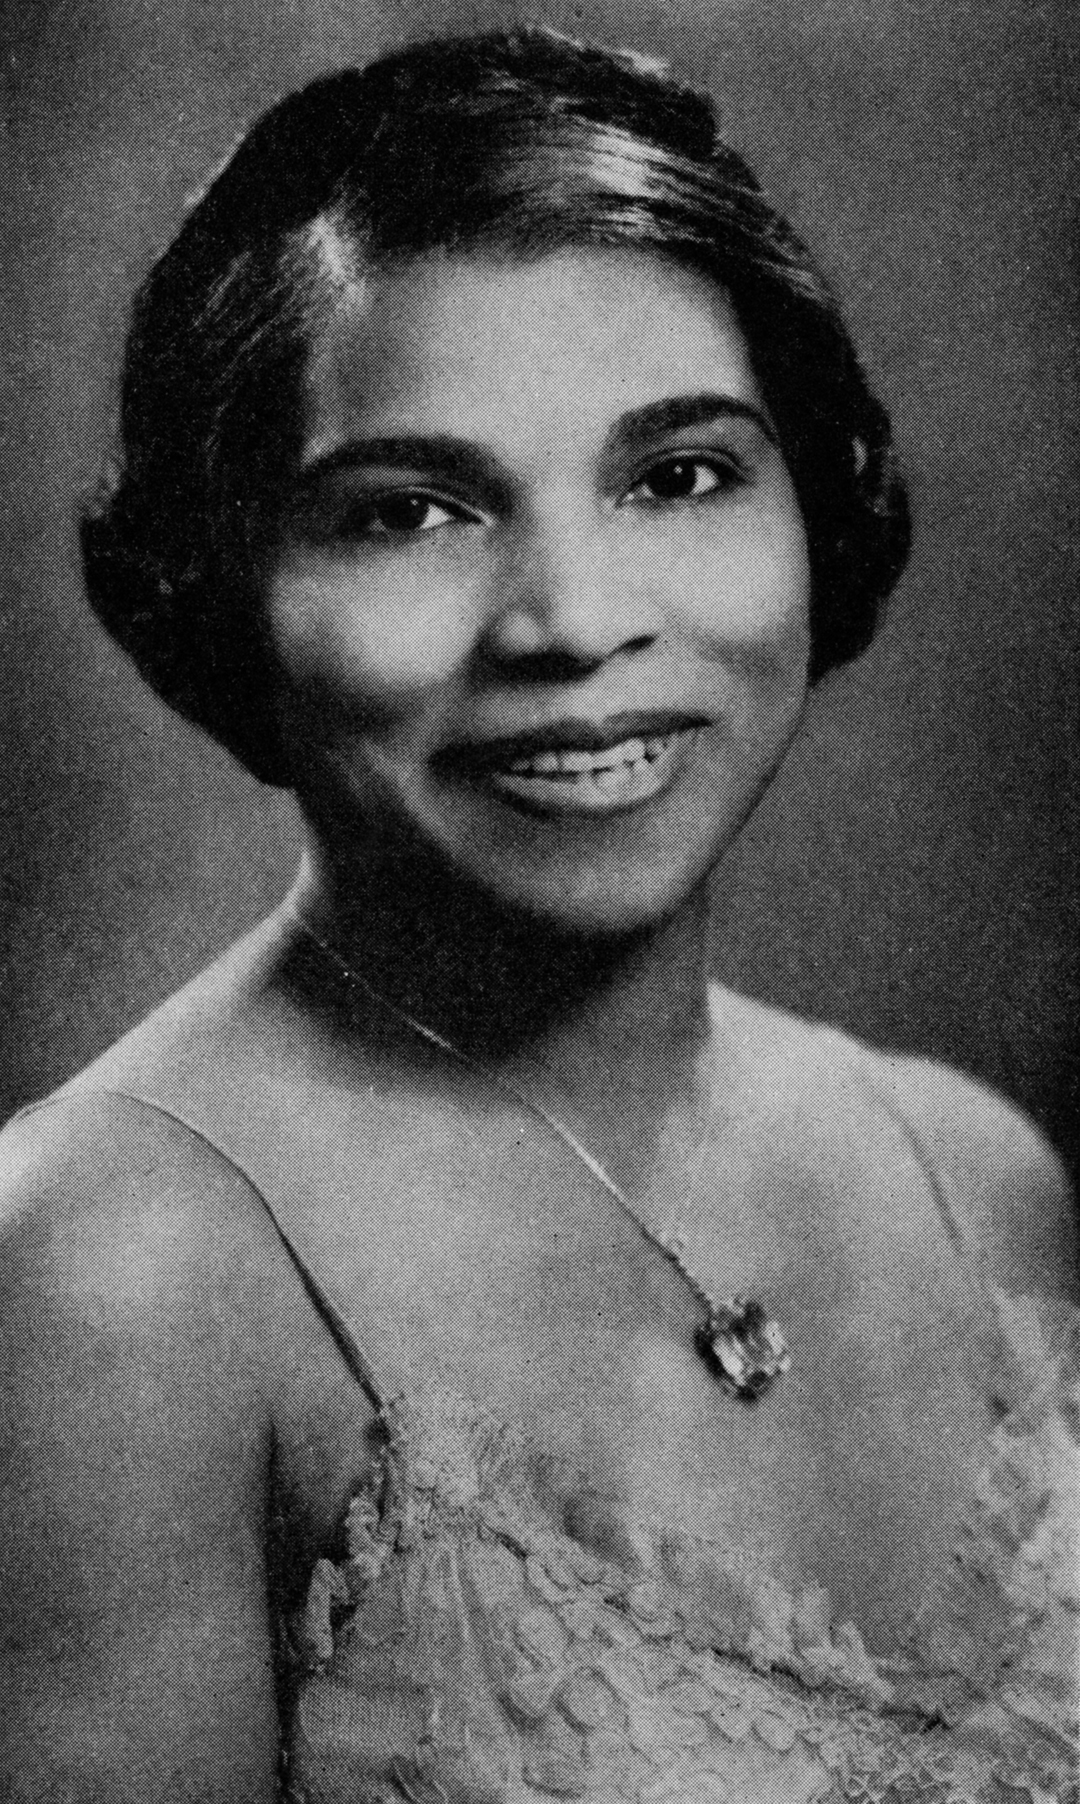 portrait of Marian Anderson in a lace dress